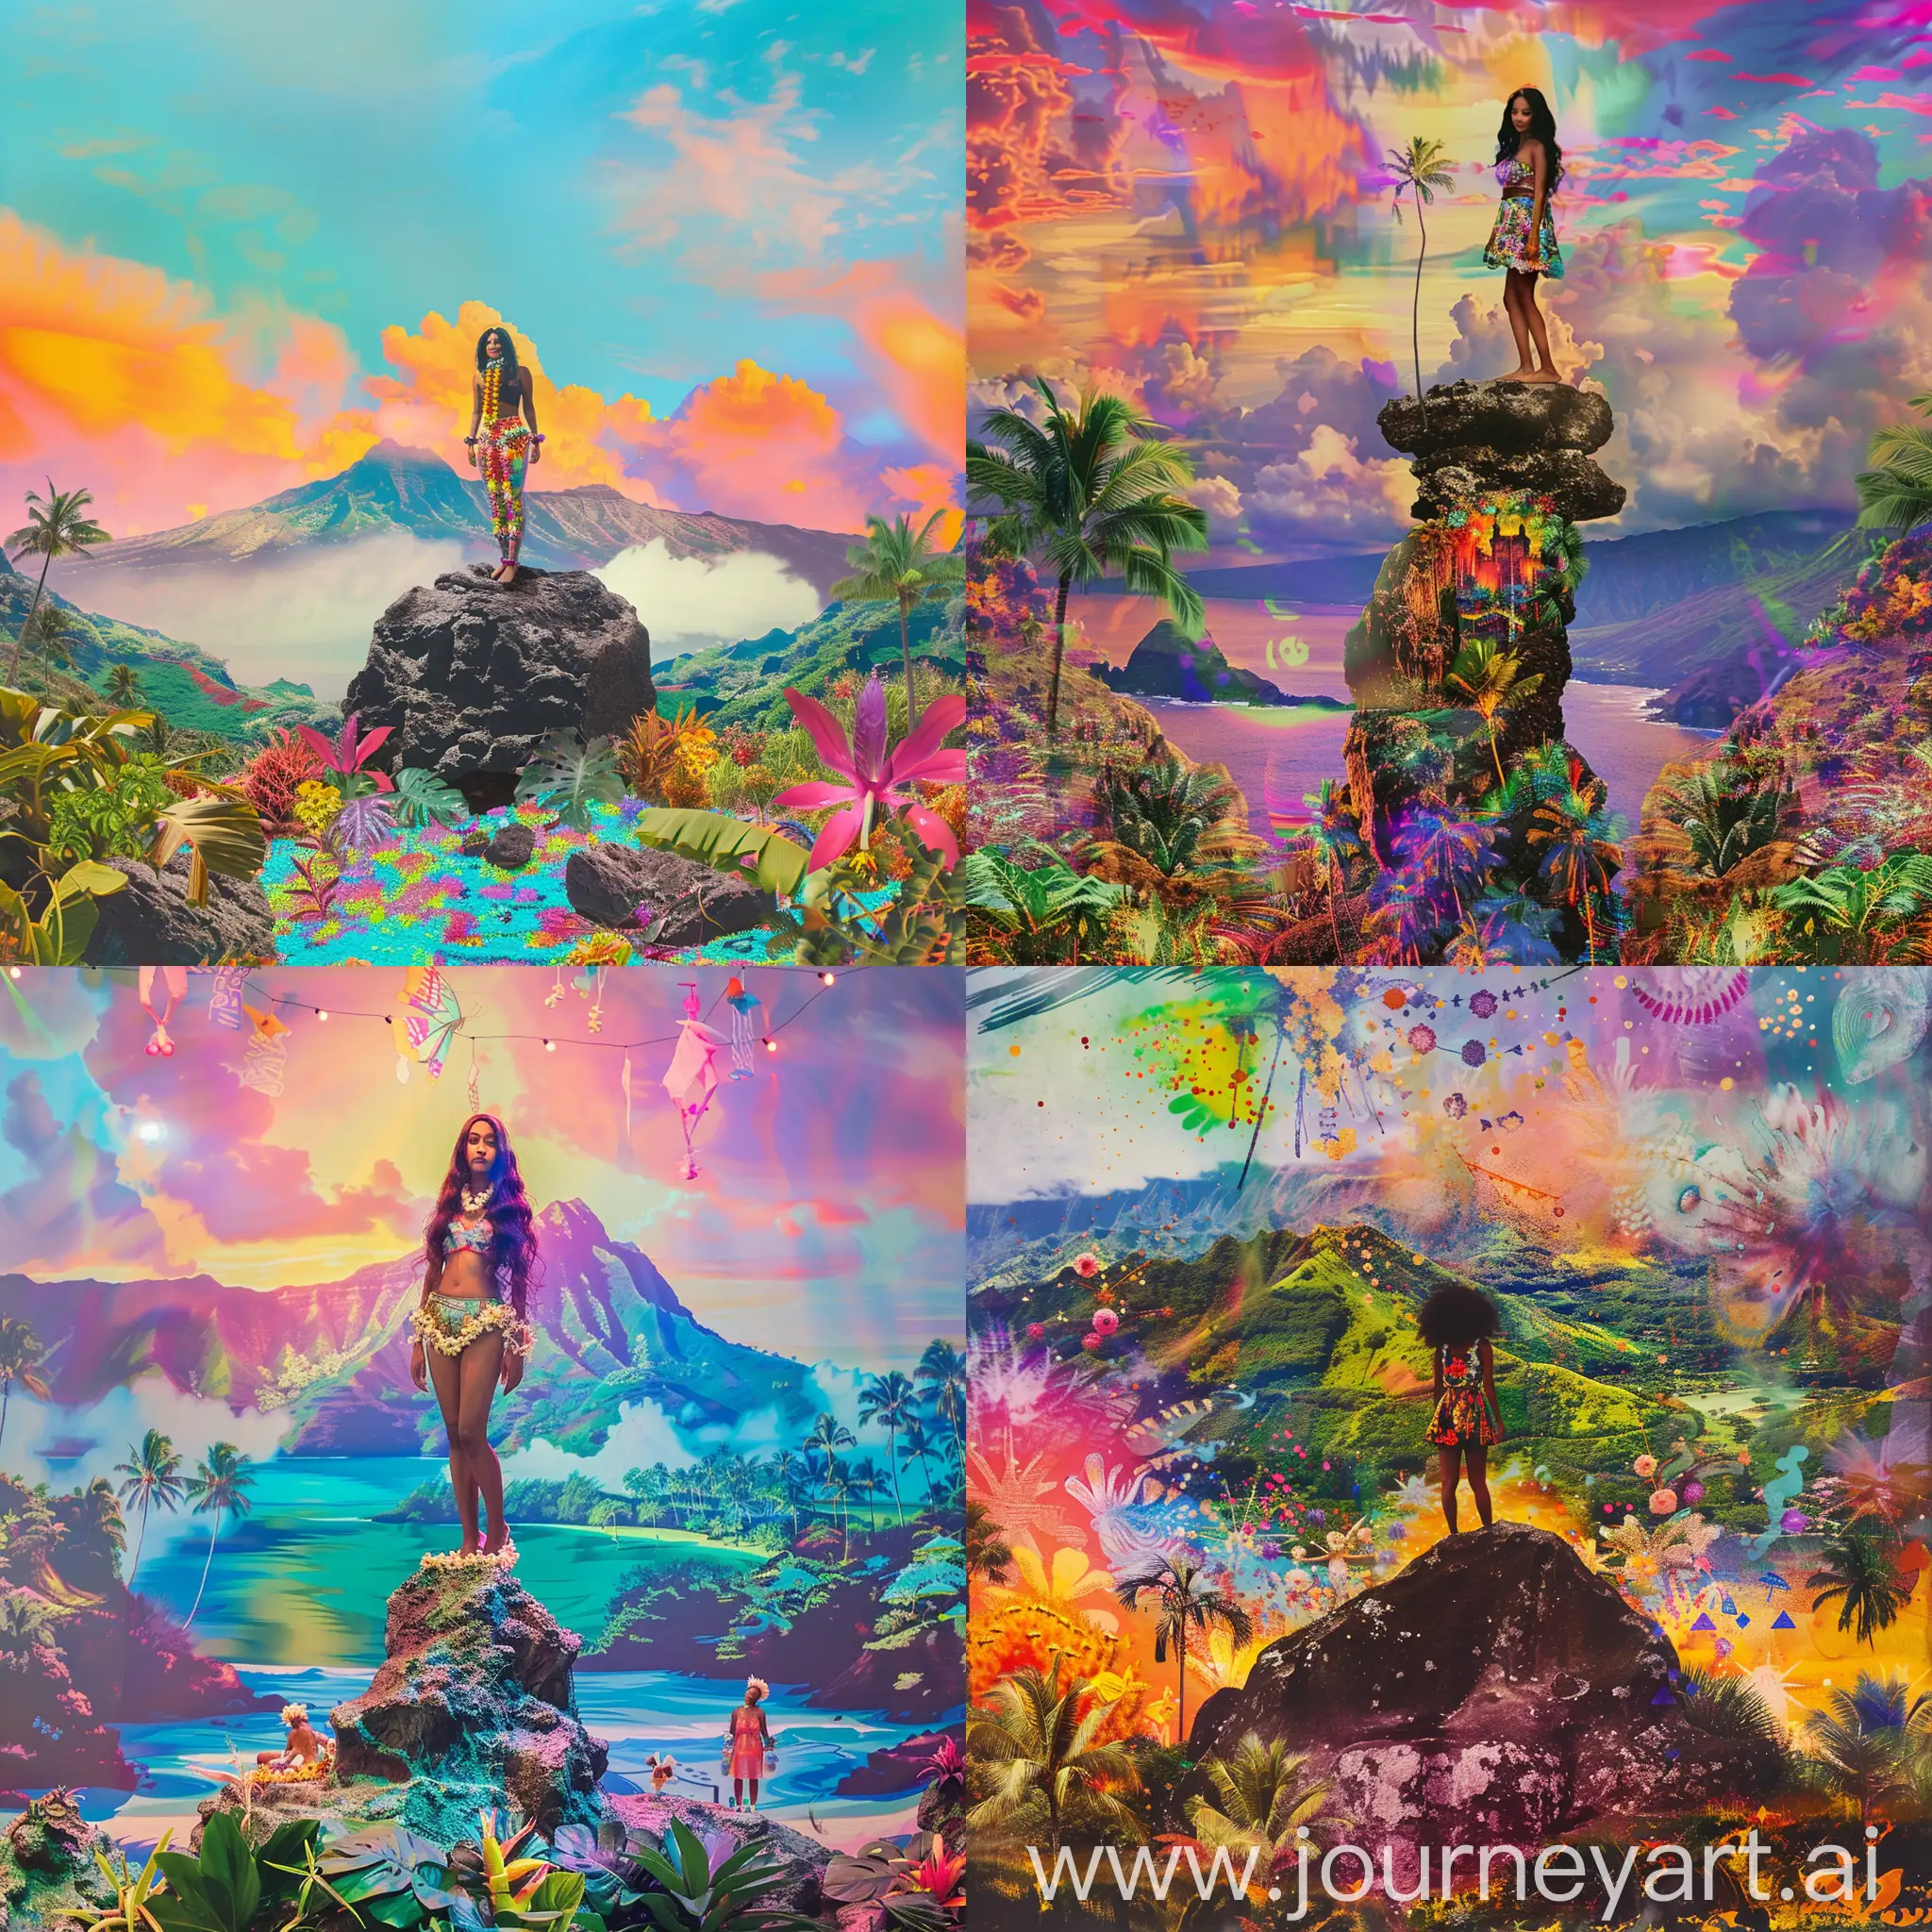 Blasian woman staring at the camera standing on top of a rock in a Hawaiian festival landscape with colorful and joyful pallet